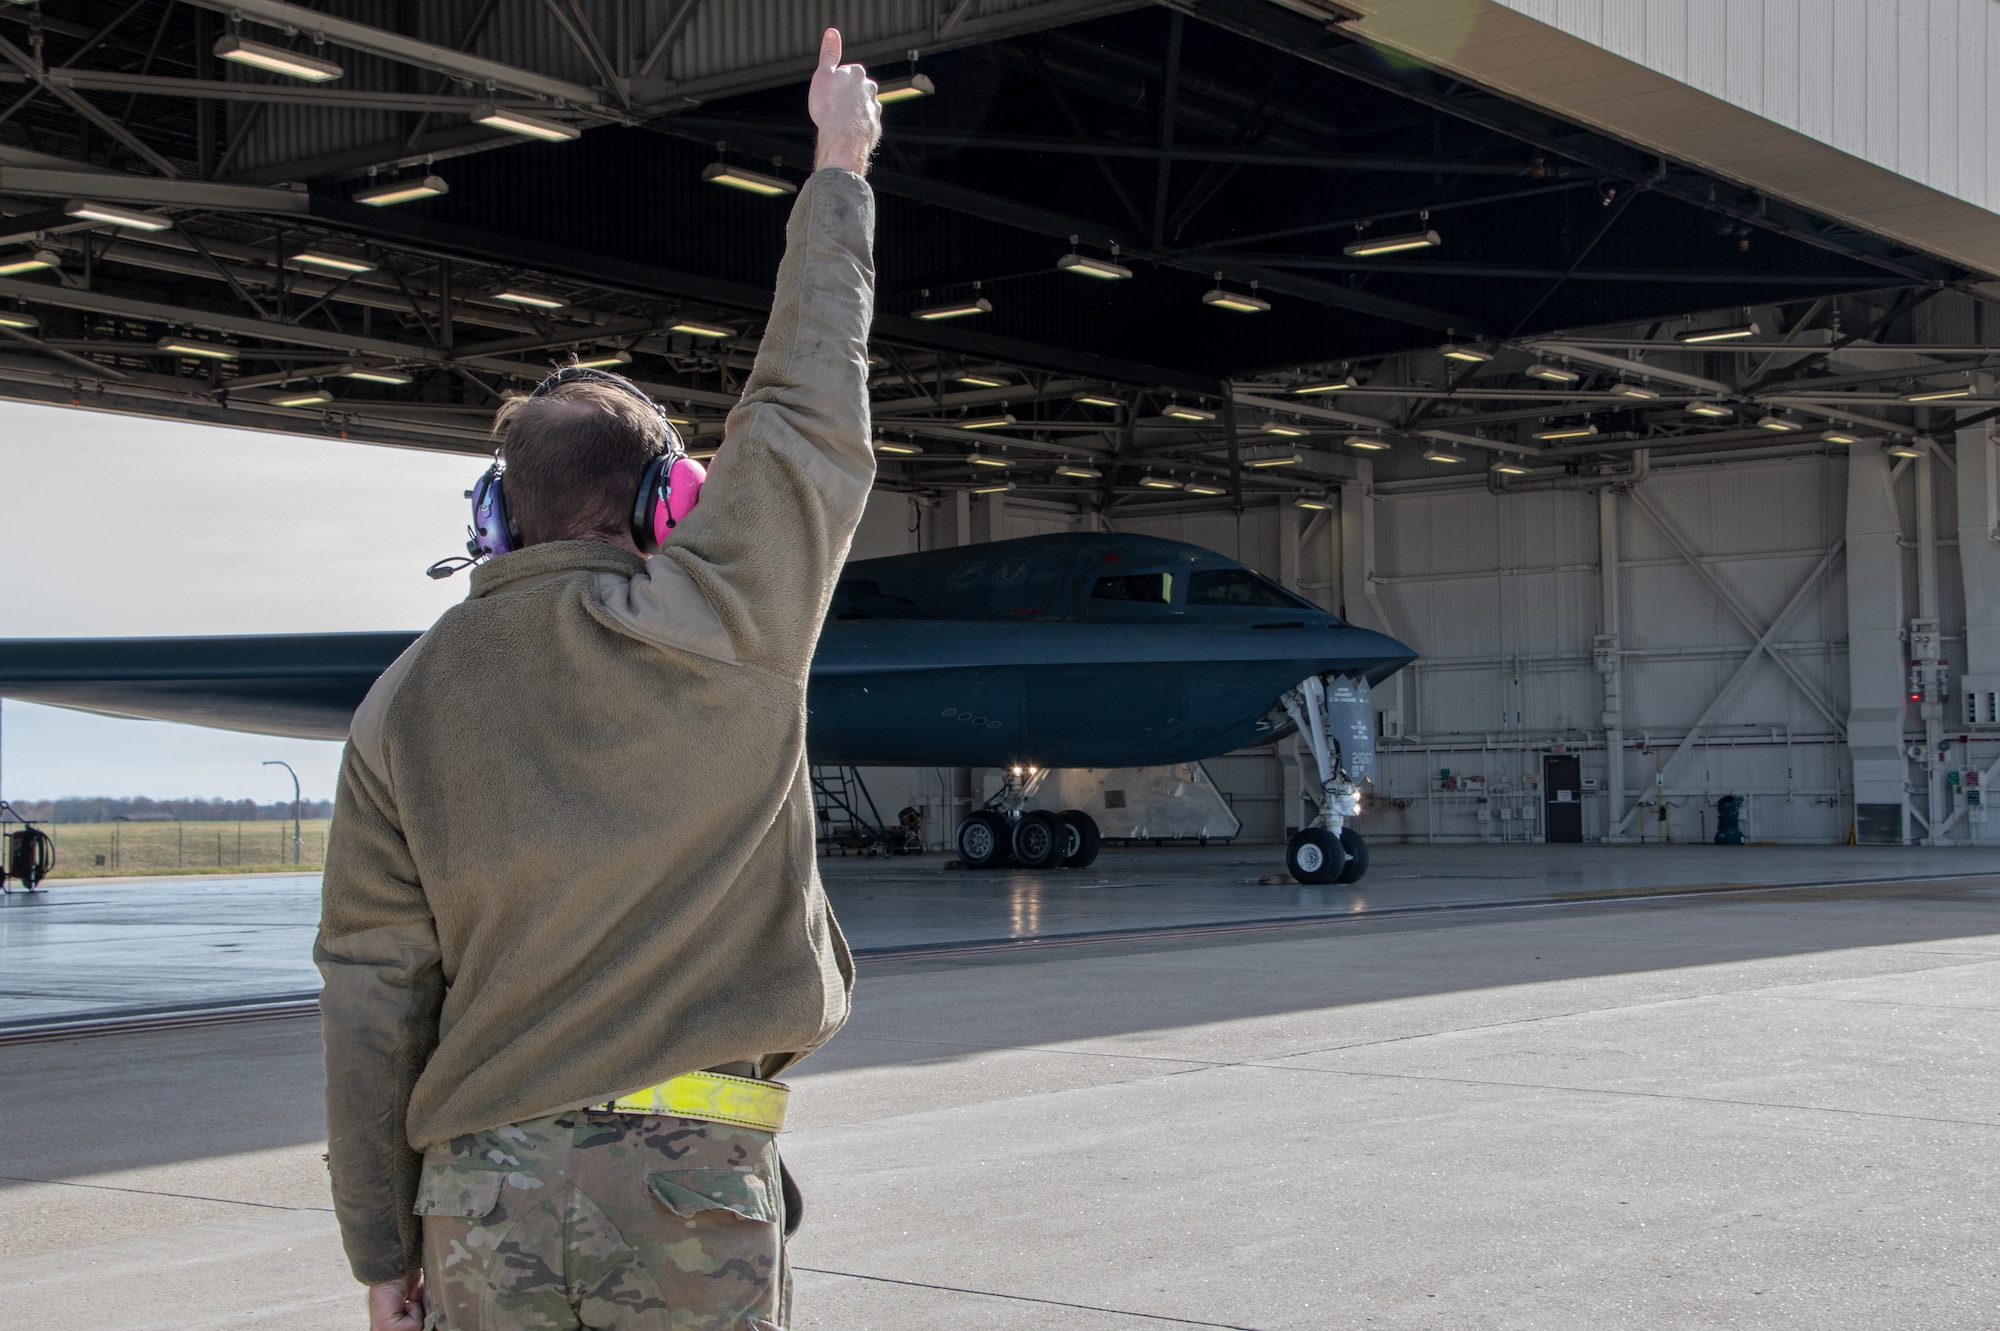 A 509th Bomb Wing maintainer marshals a B-2 Spirit stealth bomber before takeoff at Whiteman Air Force Base, Missouri, Nov. 7, 2022. Maintainers participate in exercises to keep the B-2 ready to fly anytime, anywhere. (U.S. Air National Guard photo by Airman 1st Class Phoenix Lietch)